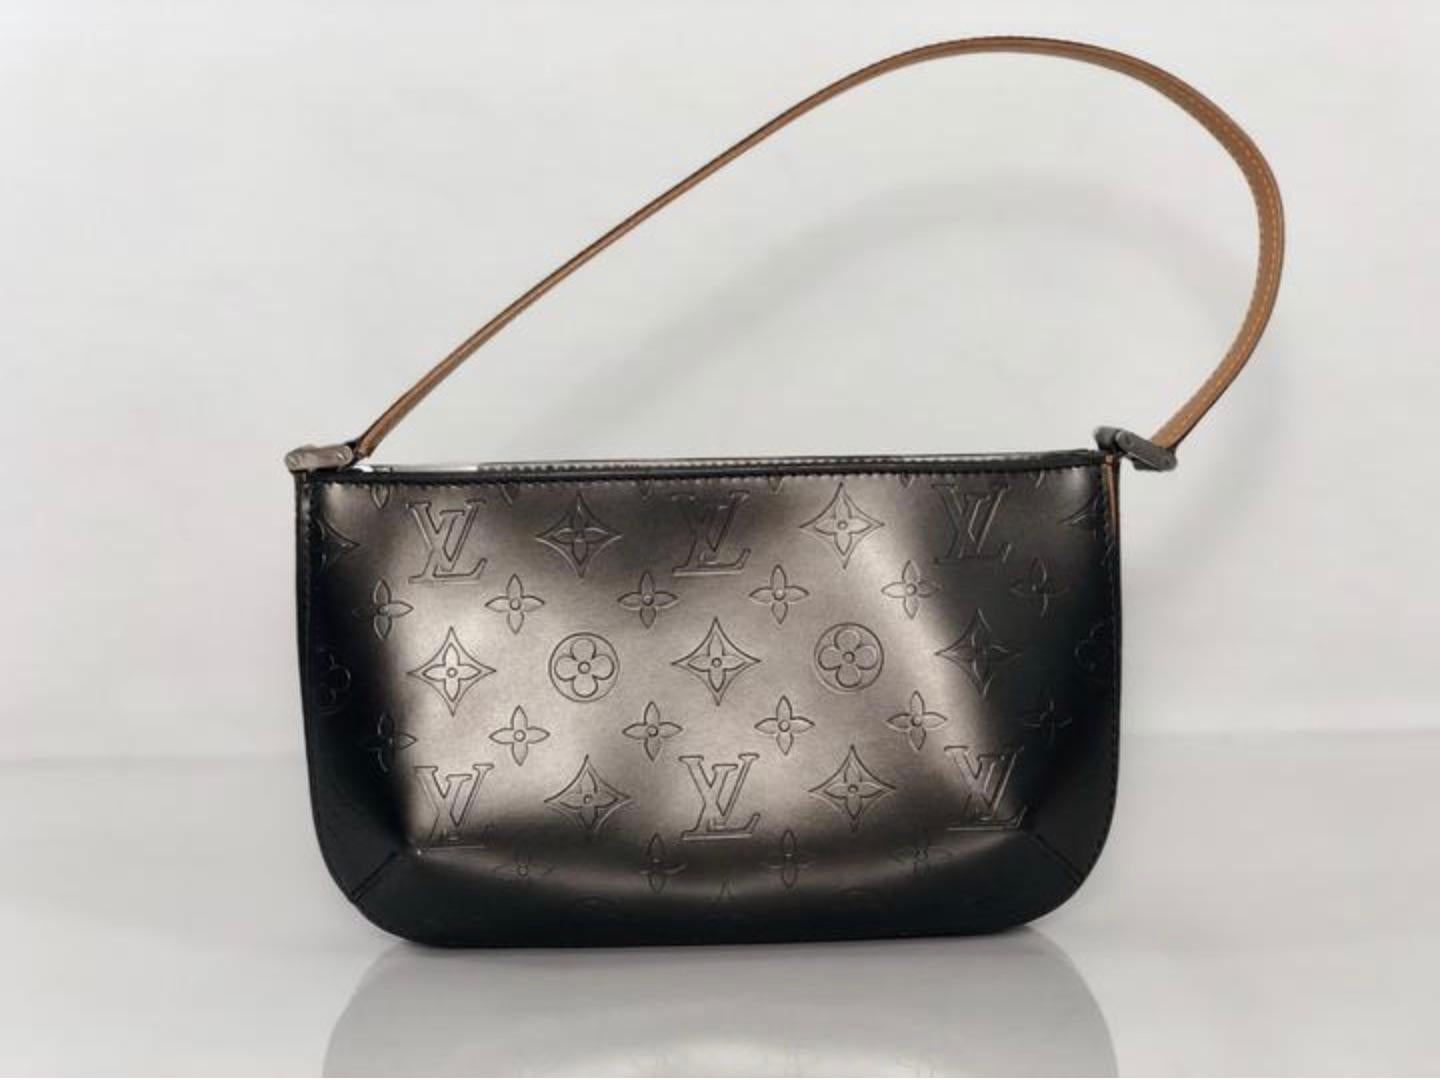 Louis Vuitton Matte Vernis Fowler in Grey Shoulder Handbag In Excellent Condition For Sale In Saint Charles, IL